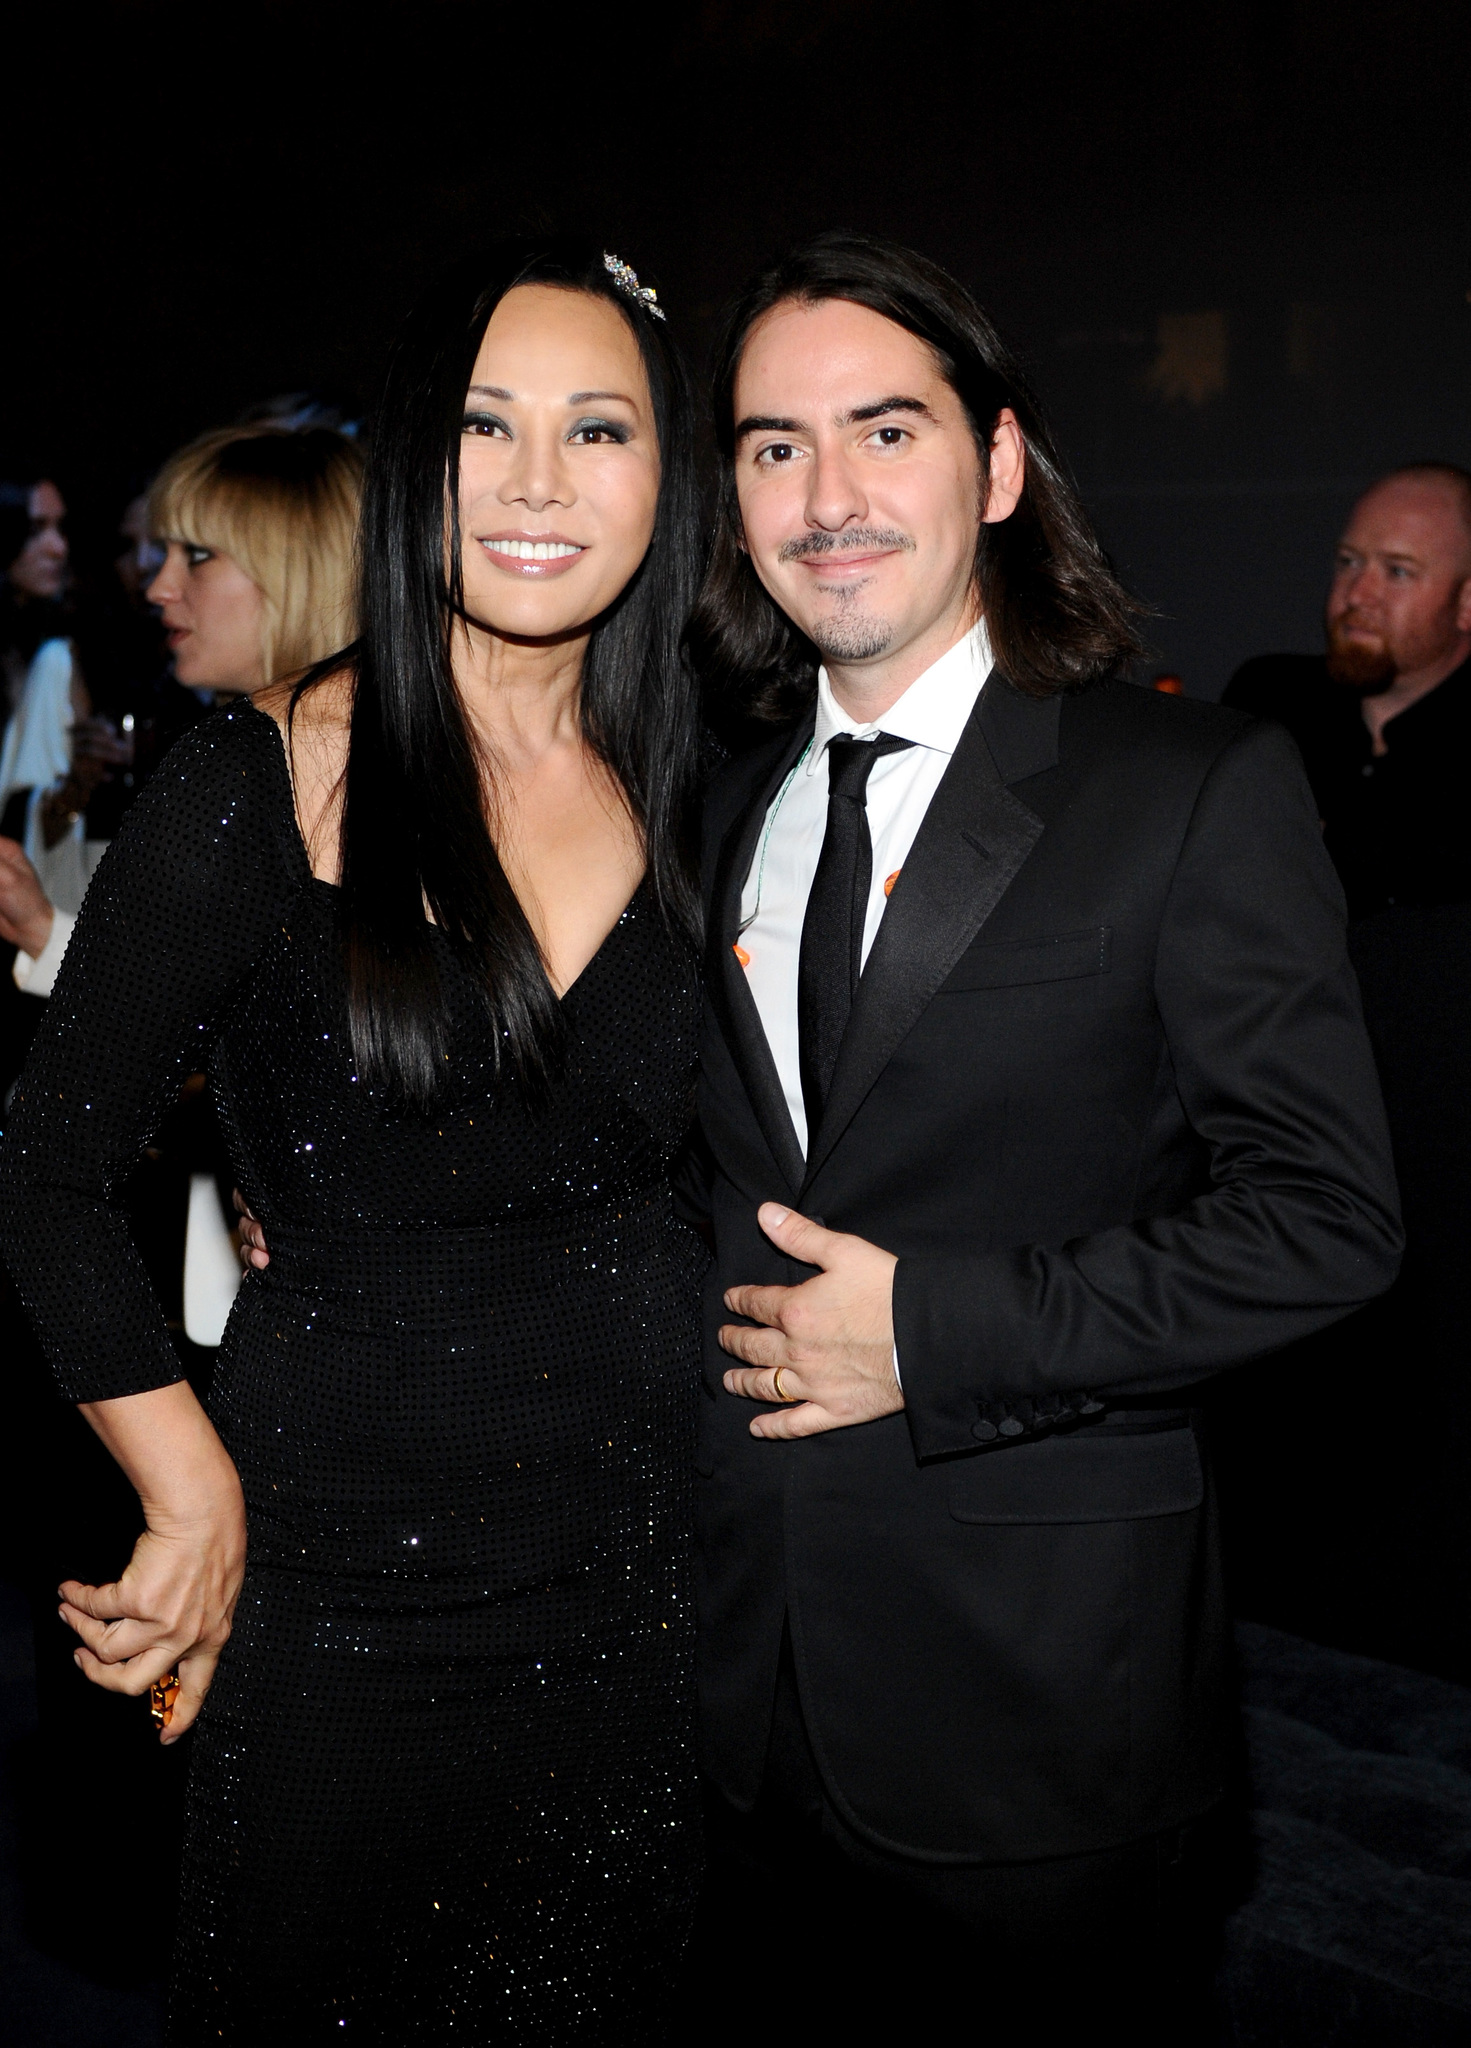 LACMA Trustee and Co-Chair Eva Chow (L) and musician Dhani Harrison attend the LACMA 2013 Art + Film Gala honoring Martin Scorsese and David Hockney